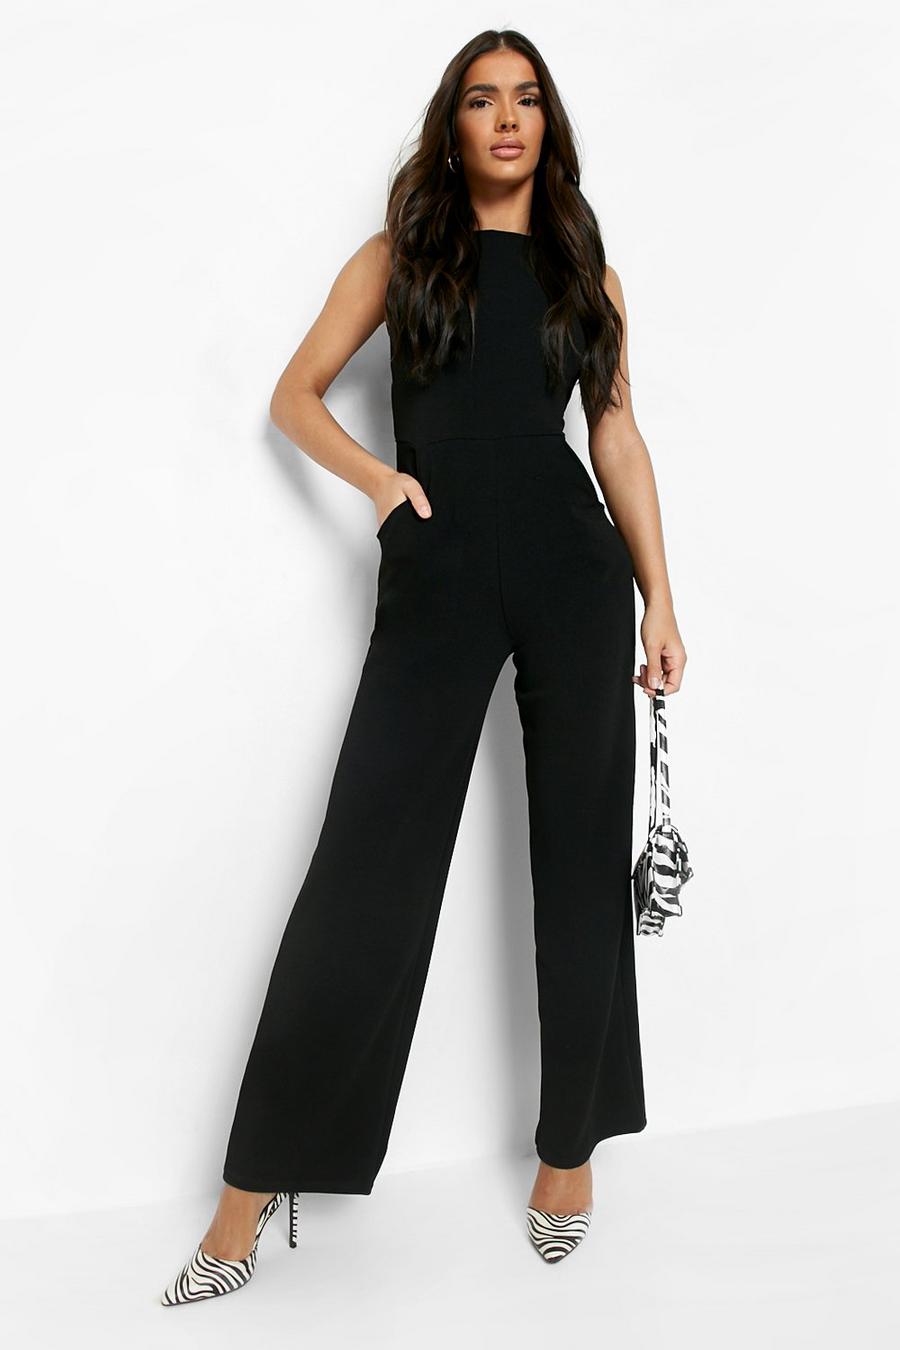  Women's Sexy Tights Cut Out Jumpsuits Rompers Women Party Black  : Clothing, Shoes & Jewelry